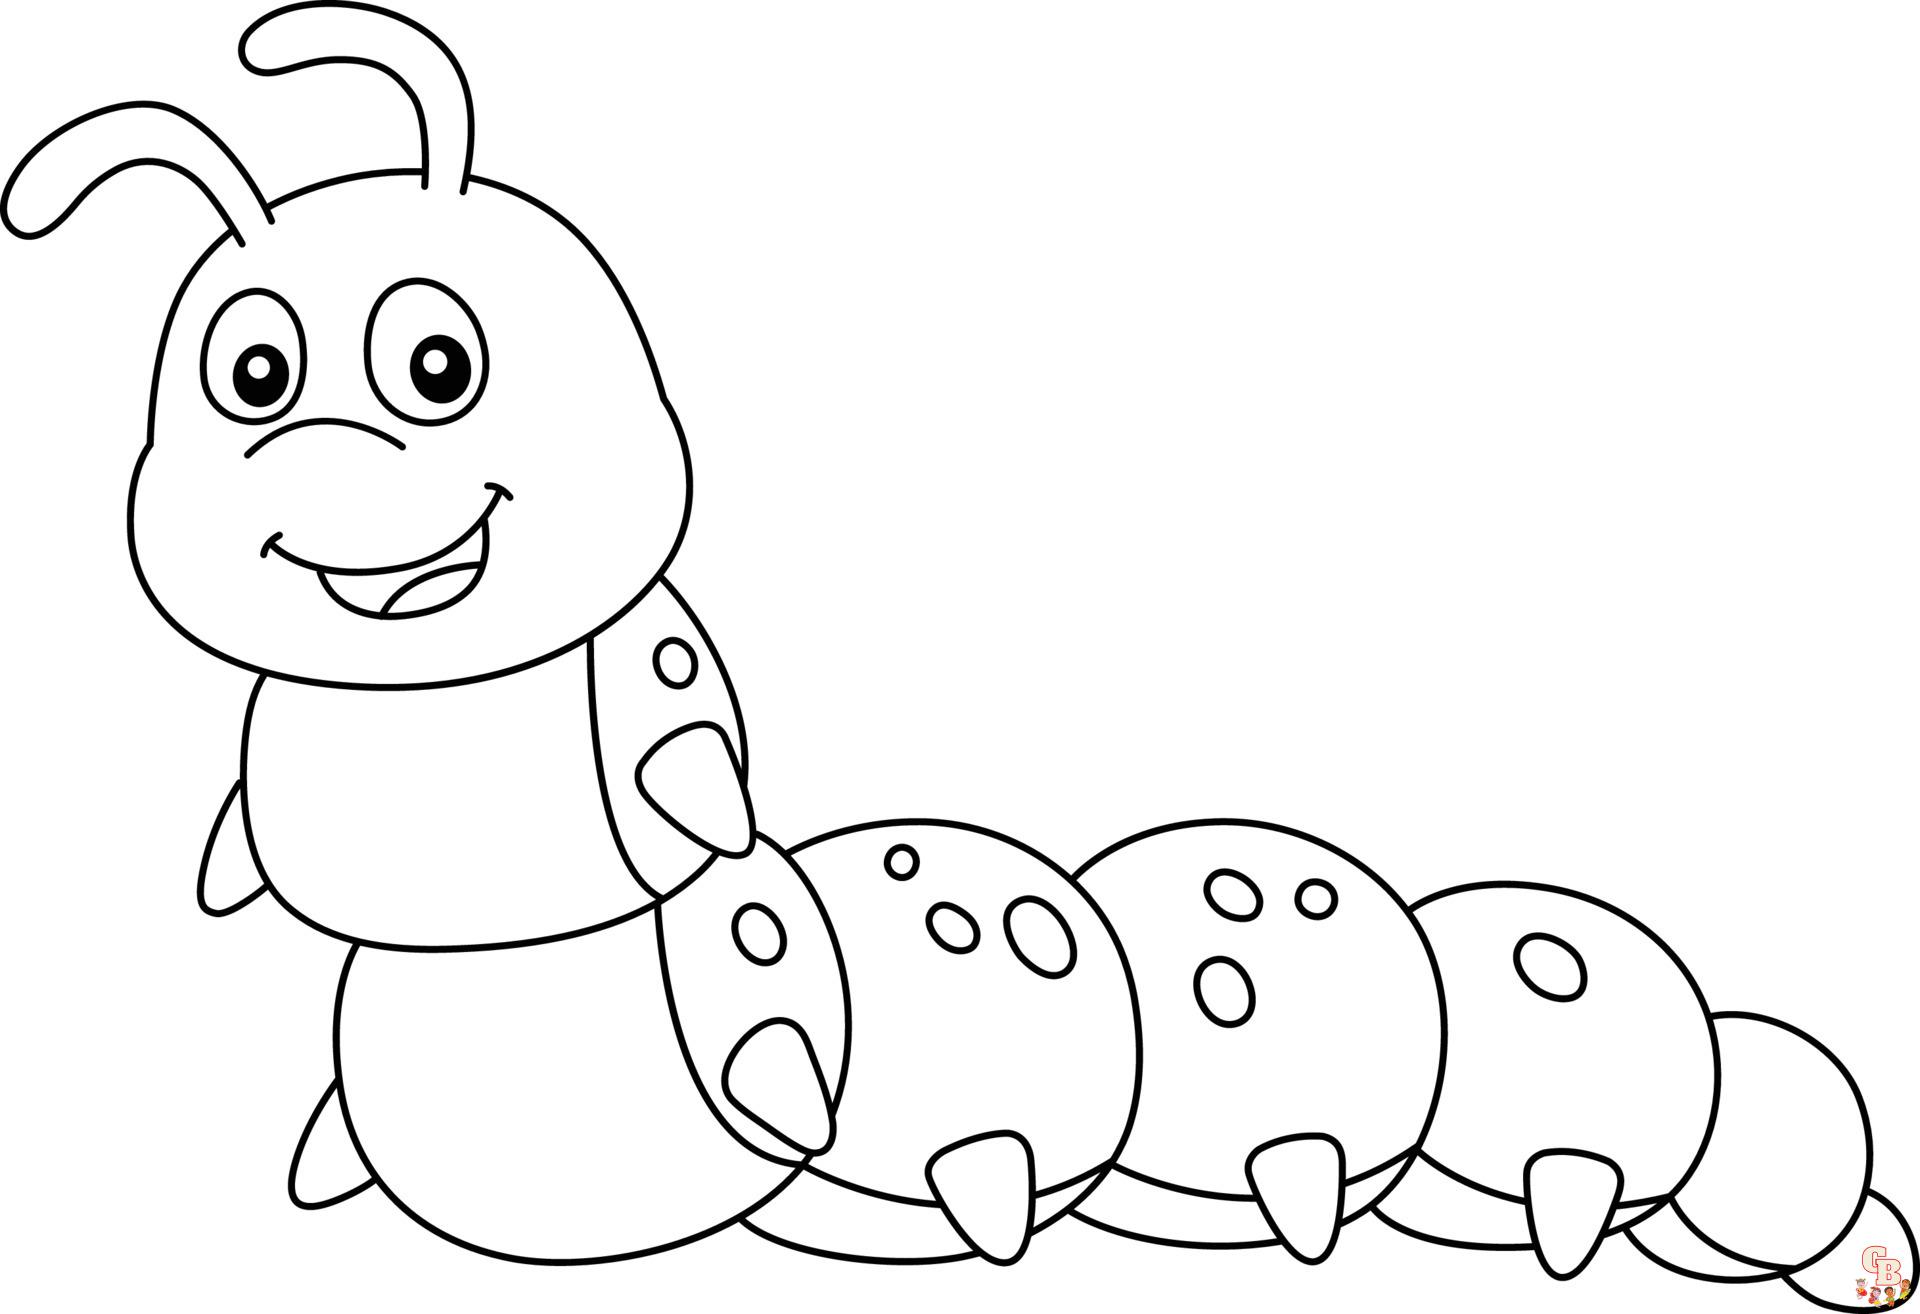 Caterpillar Coloring Pages 4